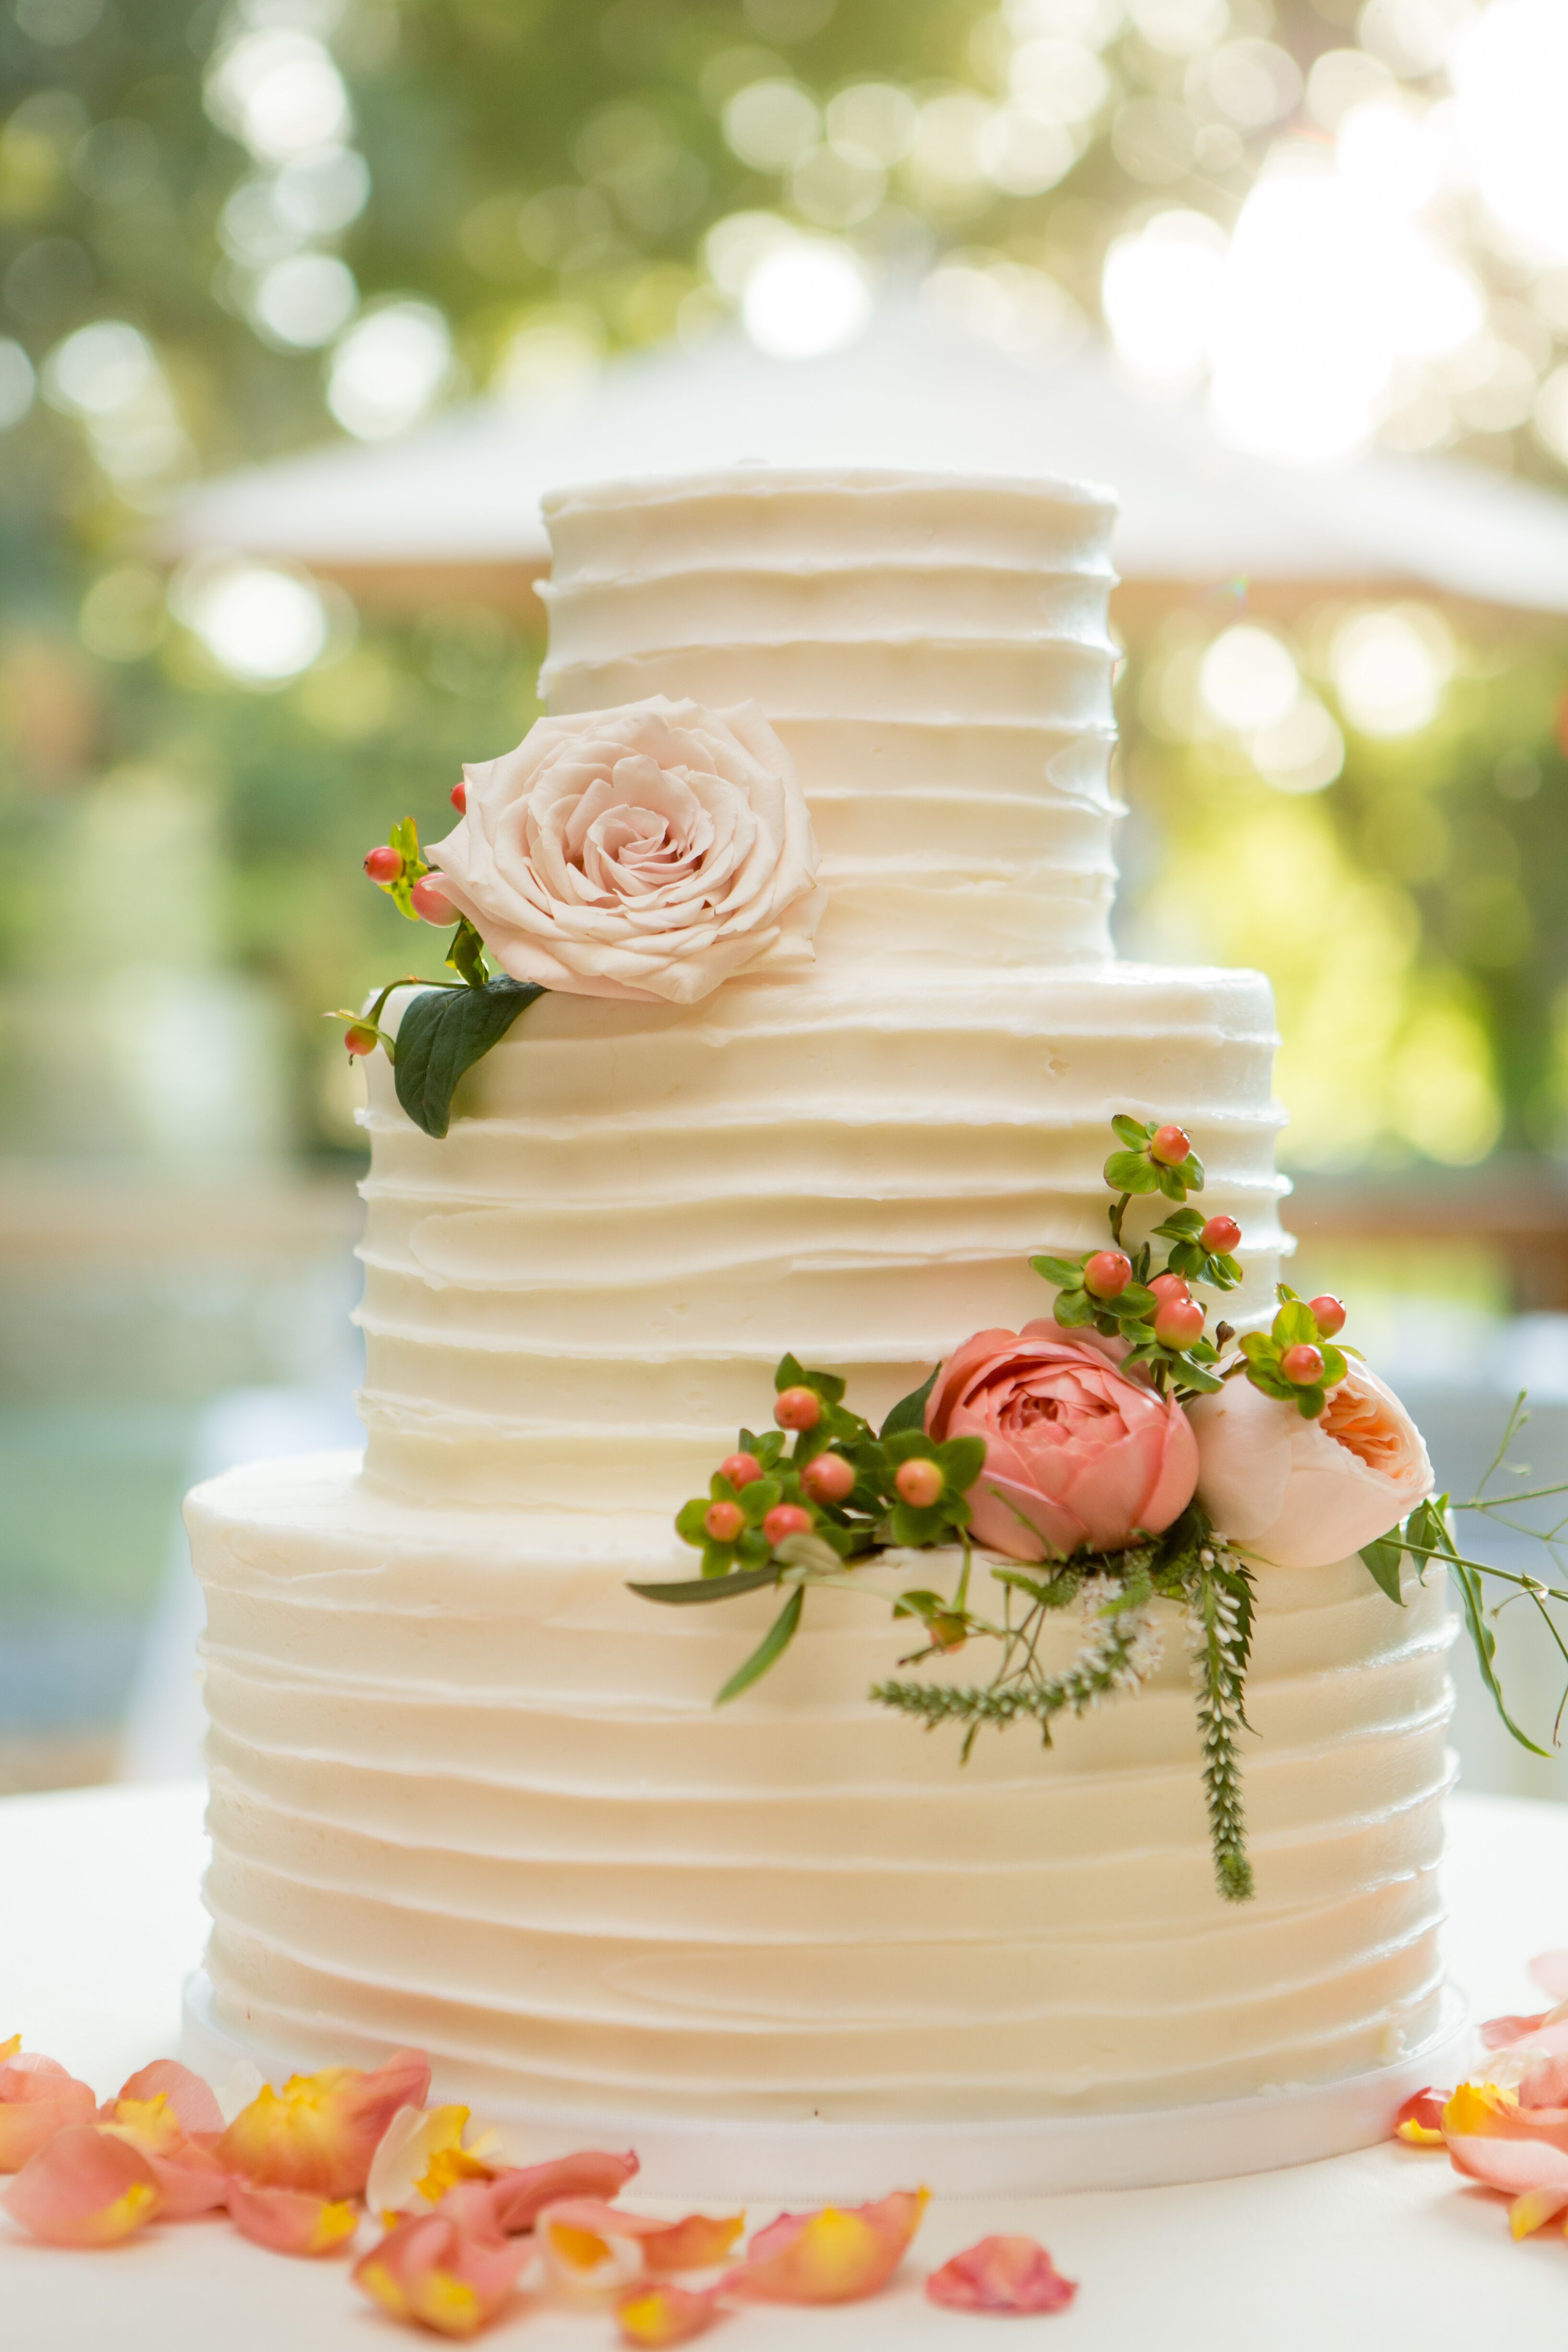 Classic, Simple Rough-Frosted Wedding Cake